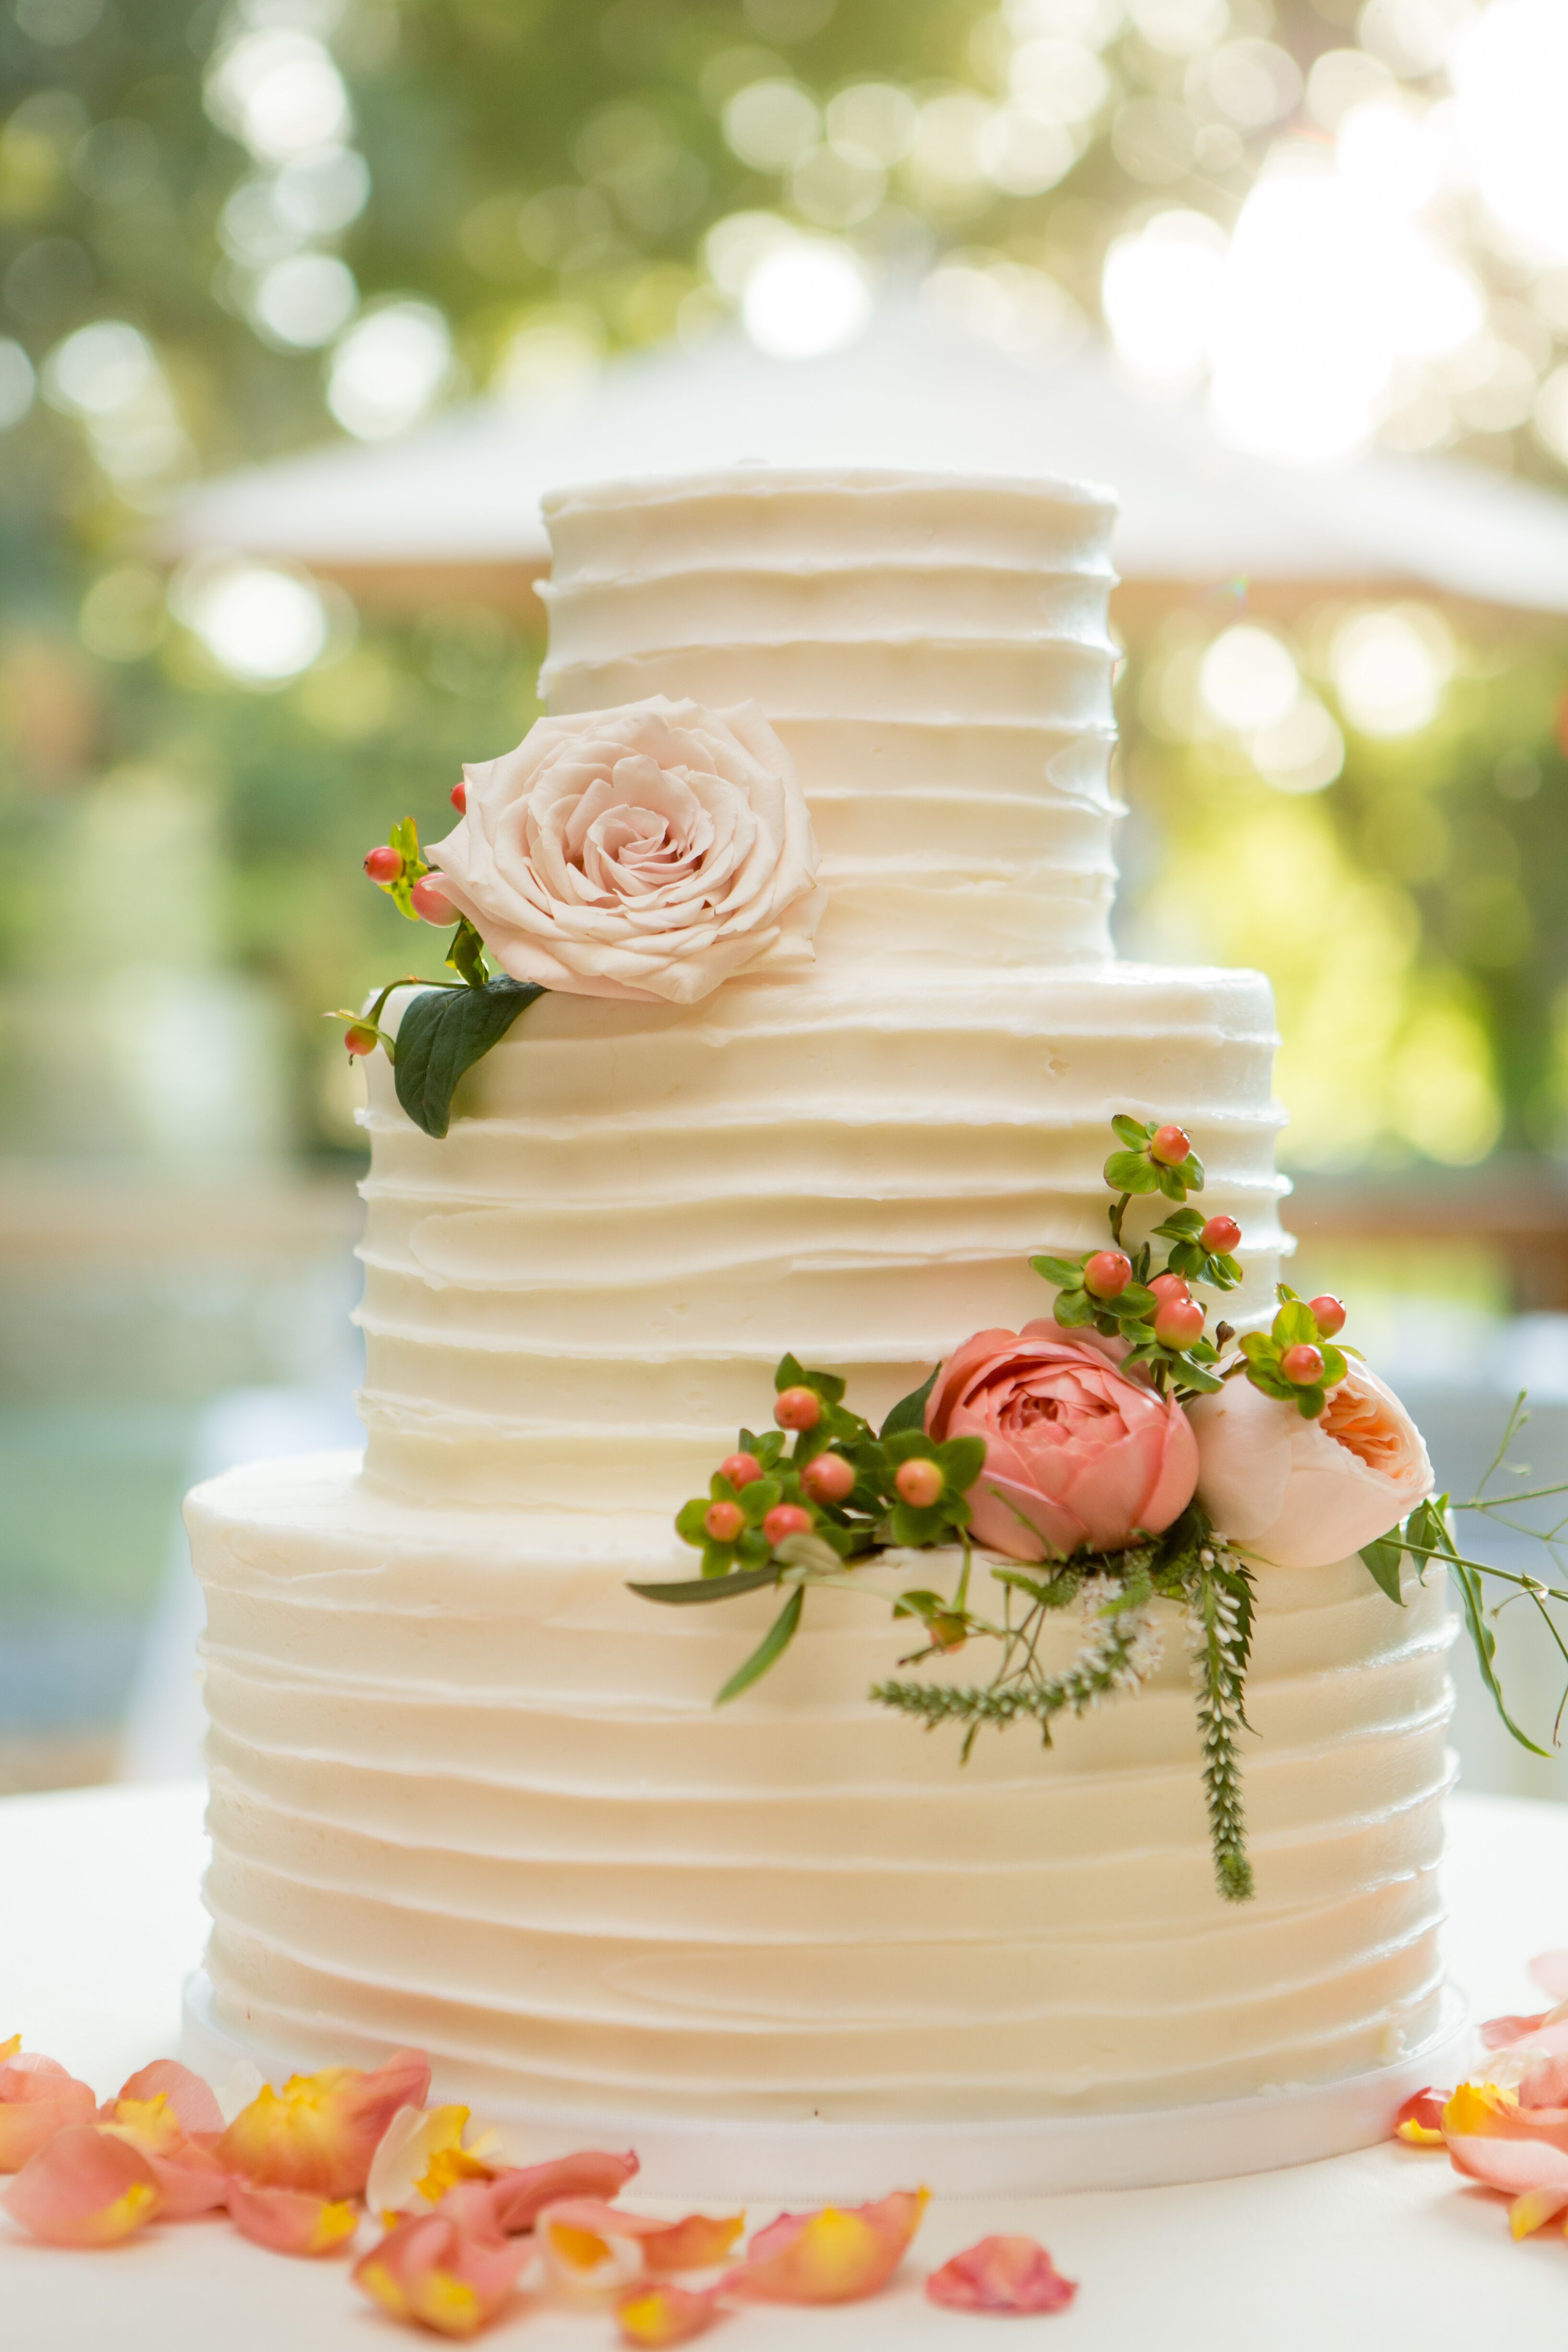 Classic, Simple Rough-Frosted Wedding Cake